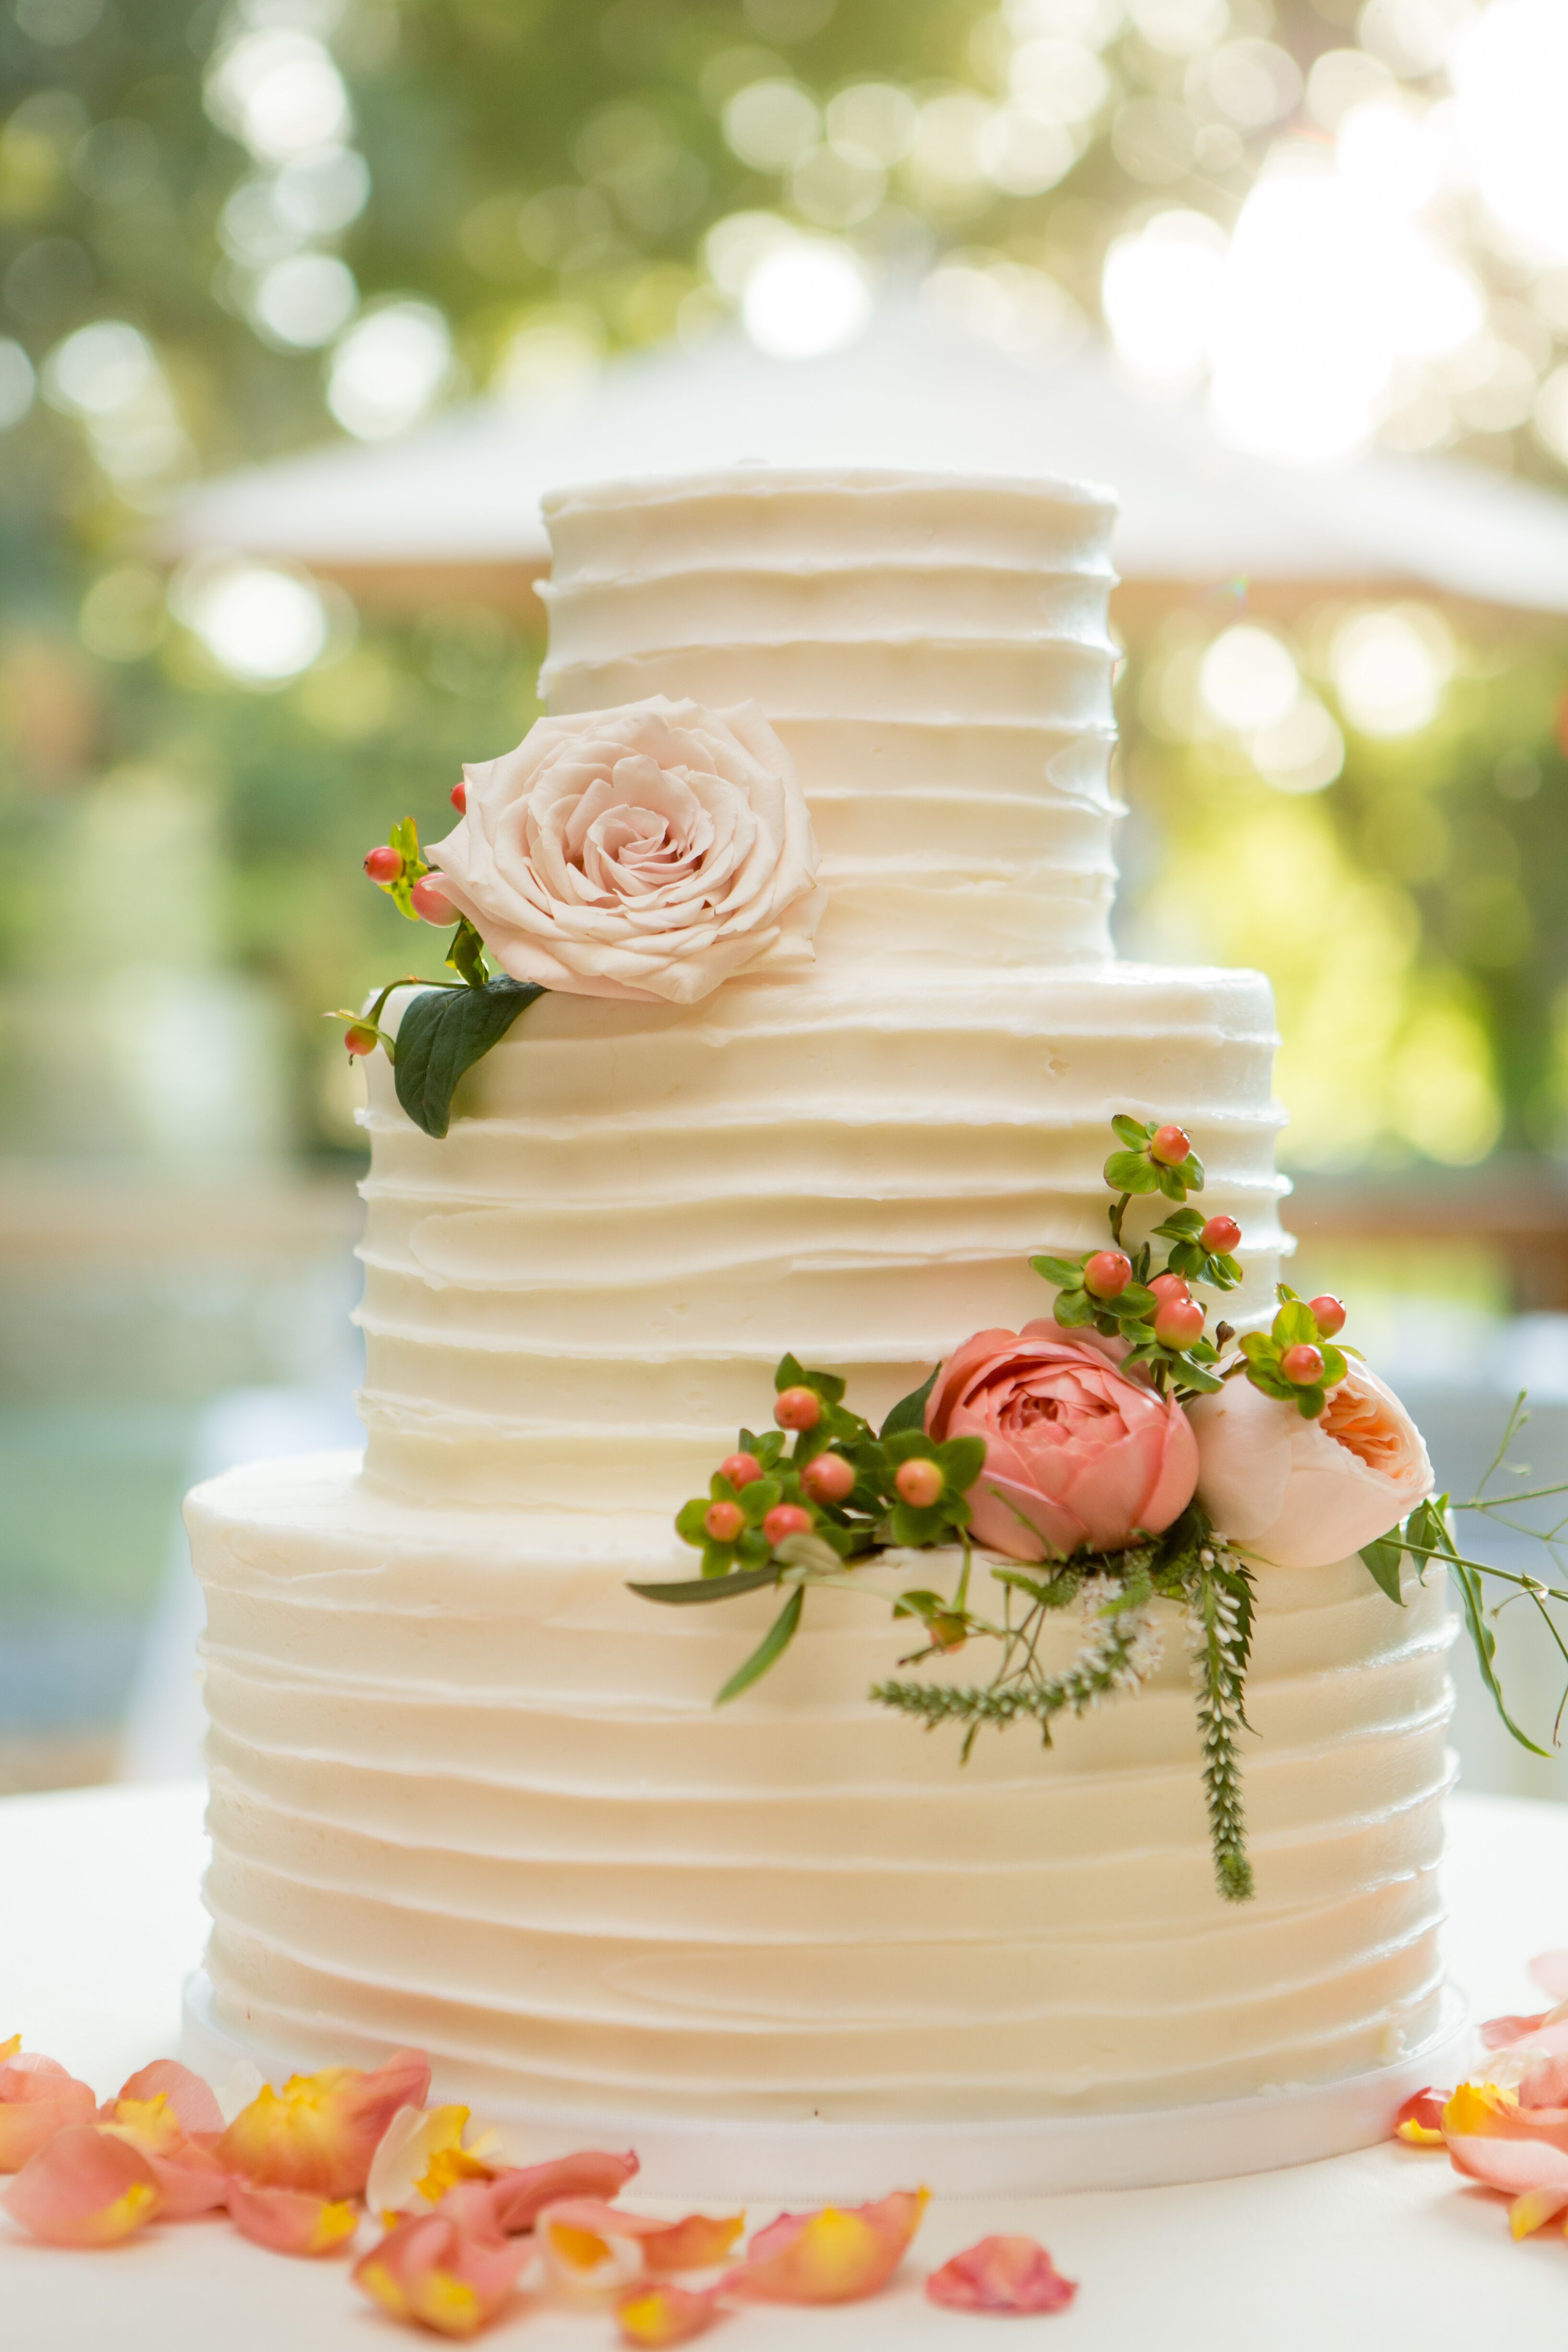 Classic, Simple Rough-Frosted Wedding Cake